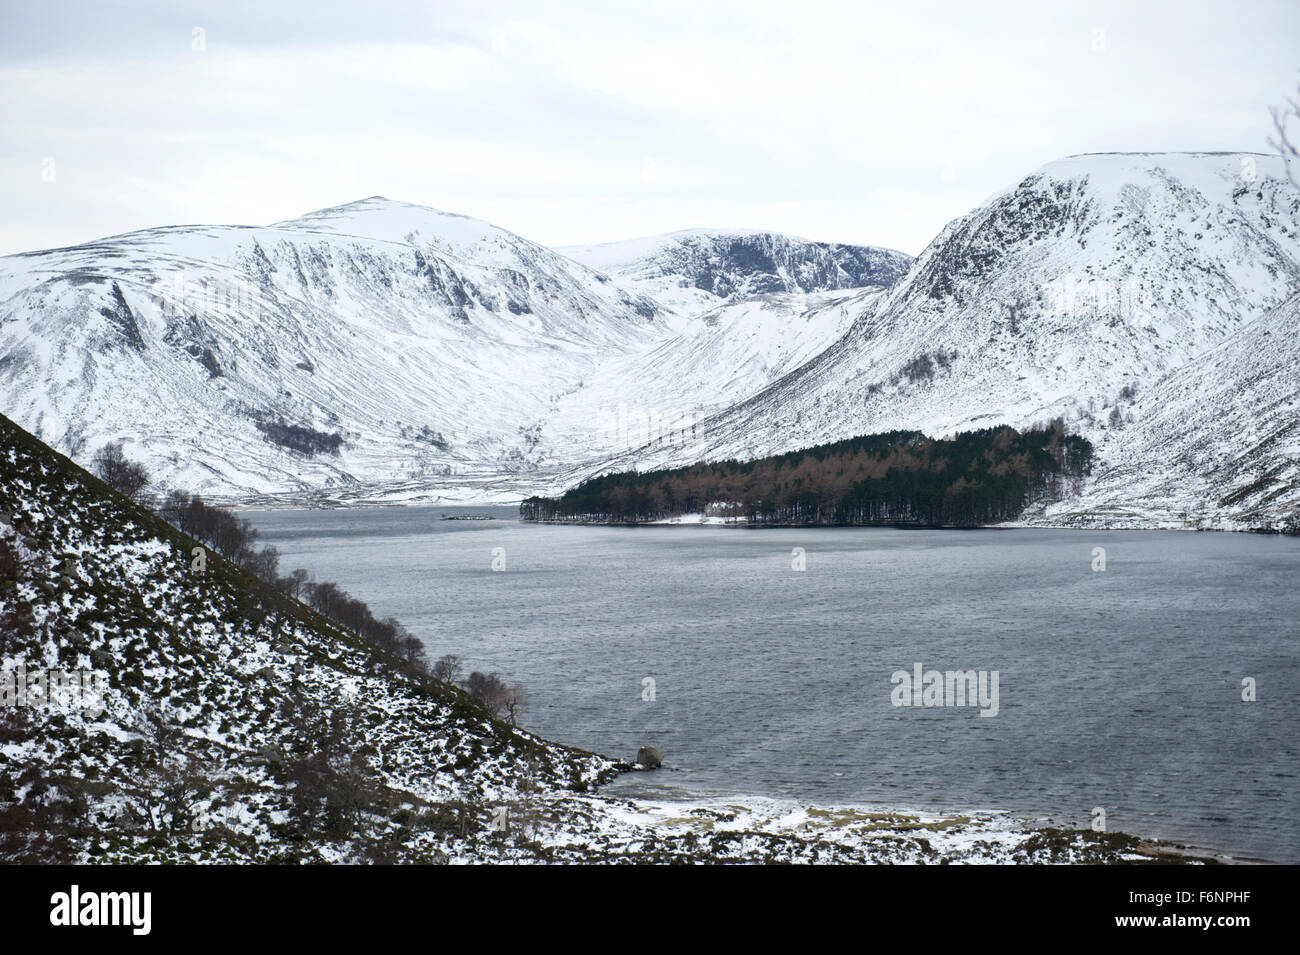 Looking along Loch Muick toward the distant Broad Cairn Allt an Dubh Loch and the wooded area around Glas allt Shiel Stock Photo